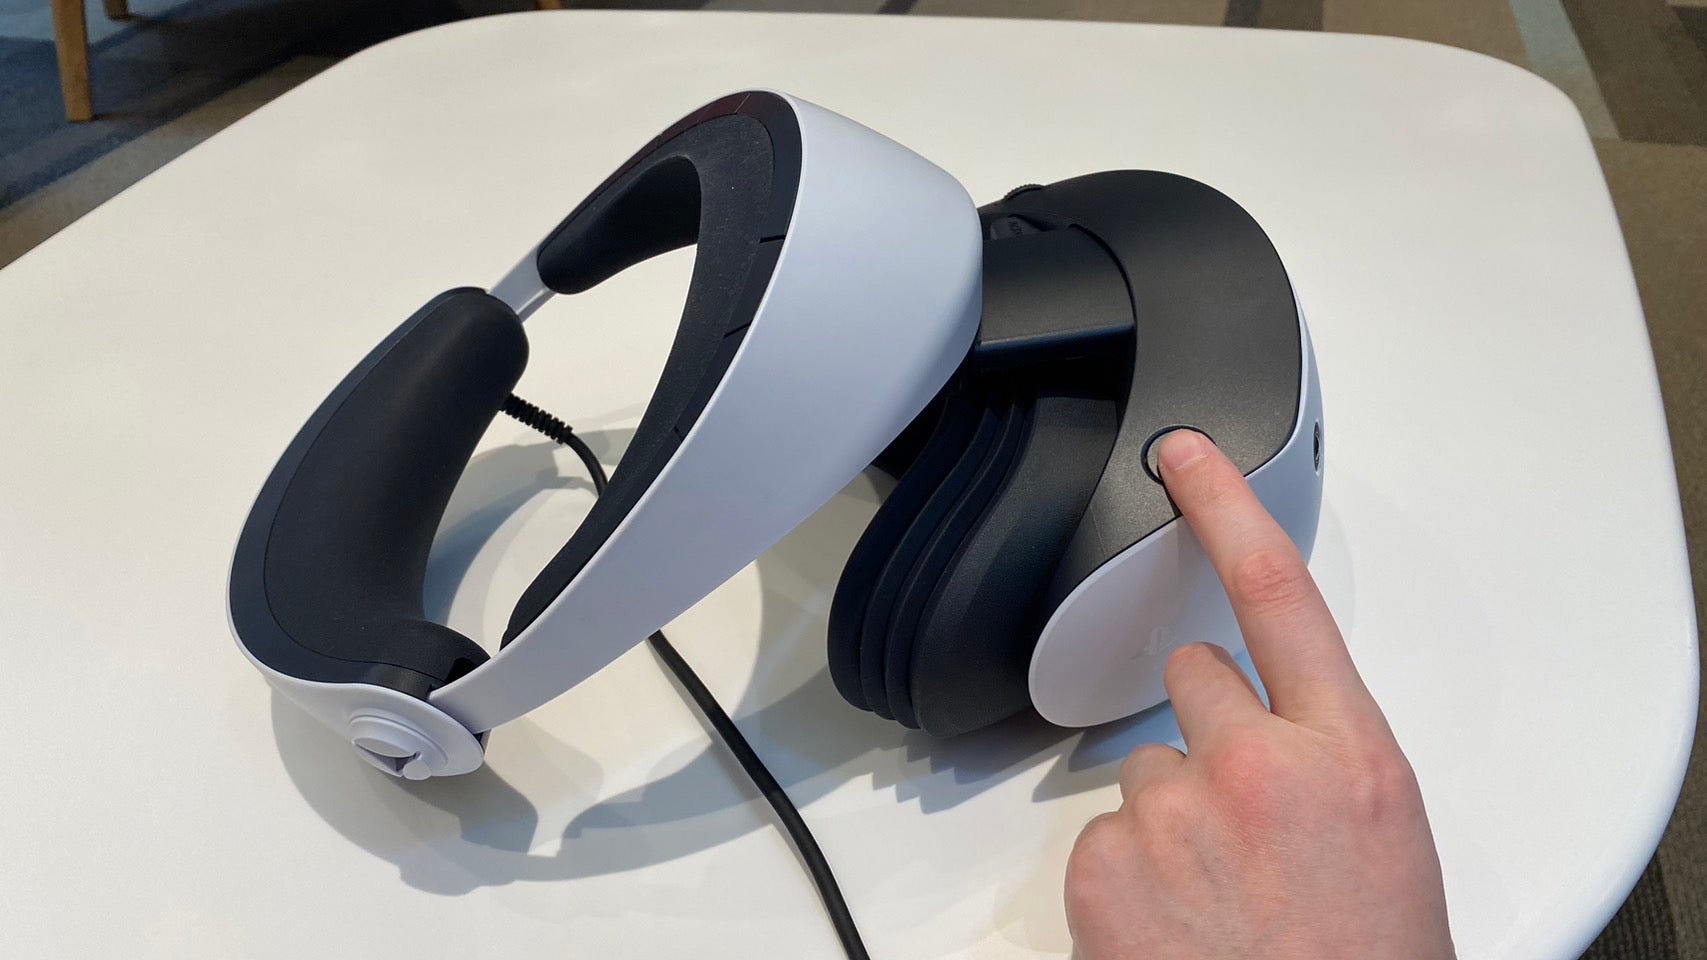 The button needed to slide out the PSVR 2 headset from its strap (Photo: Michelle Ehrhardt / Gizmodo)